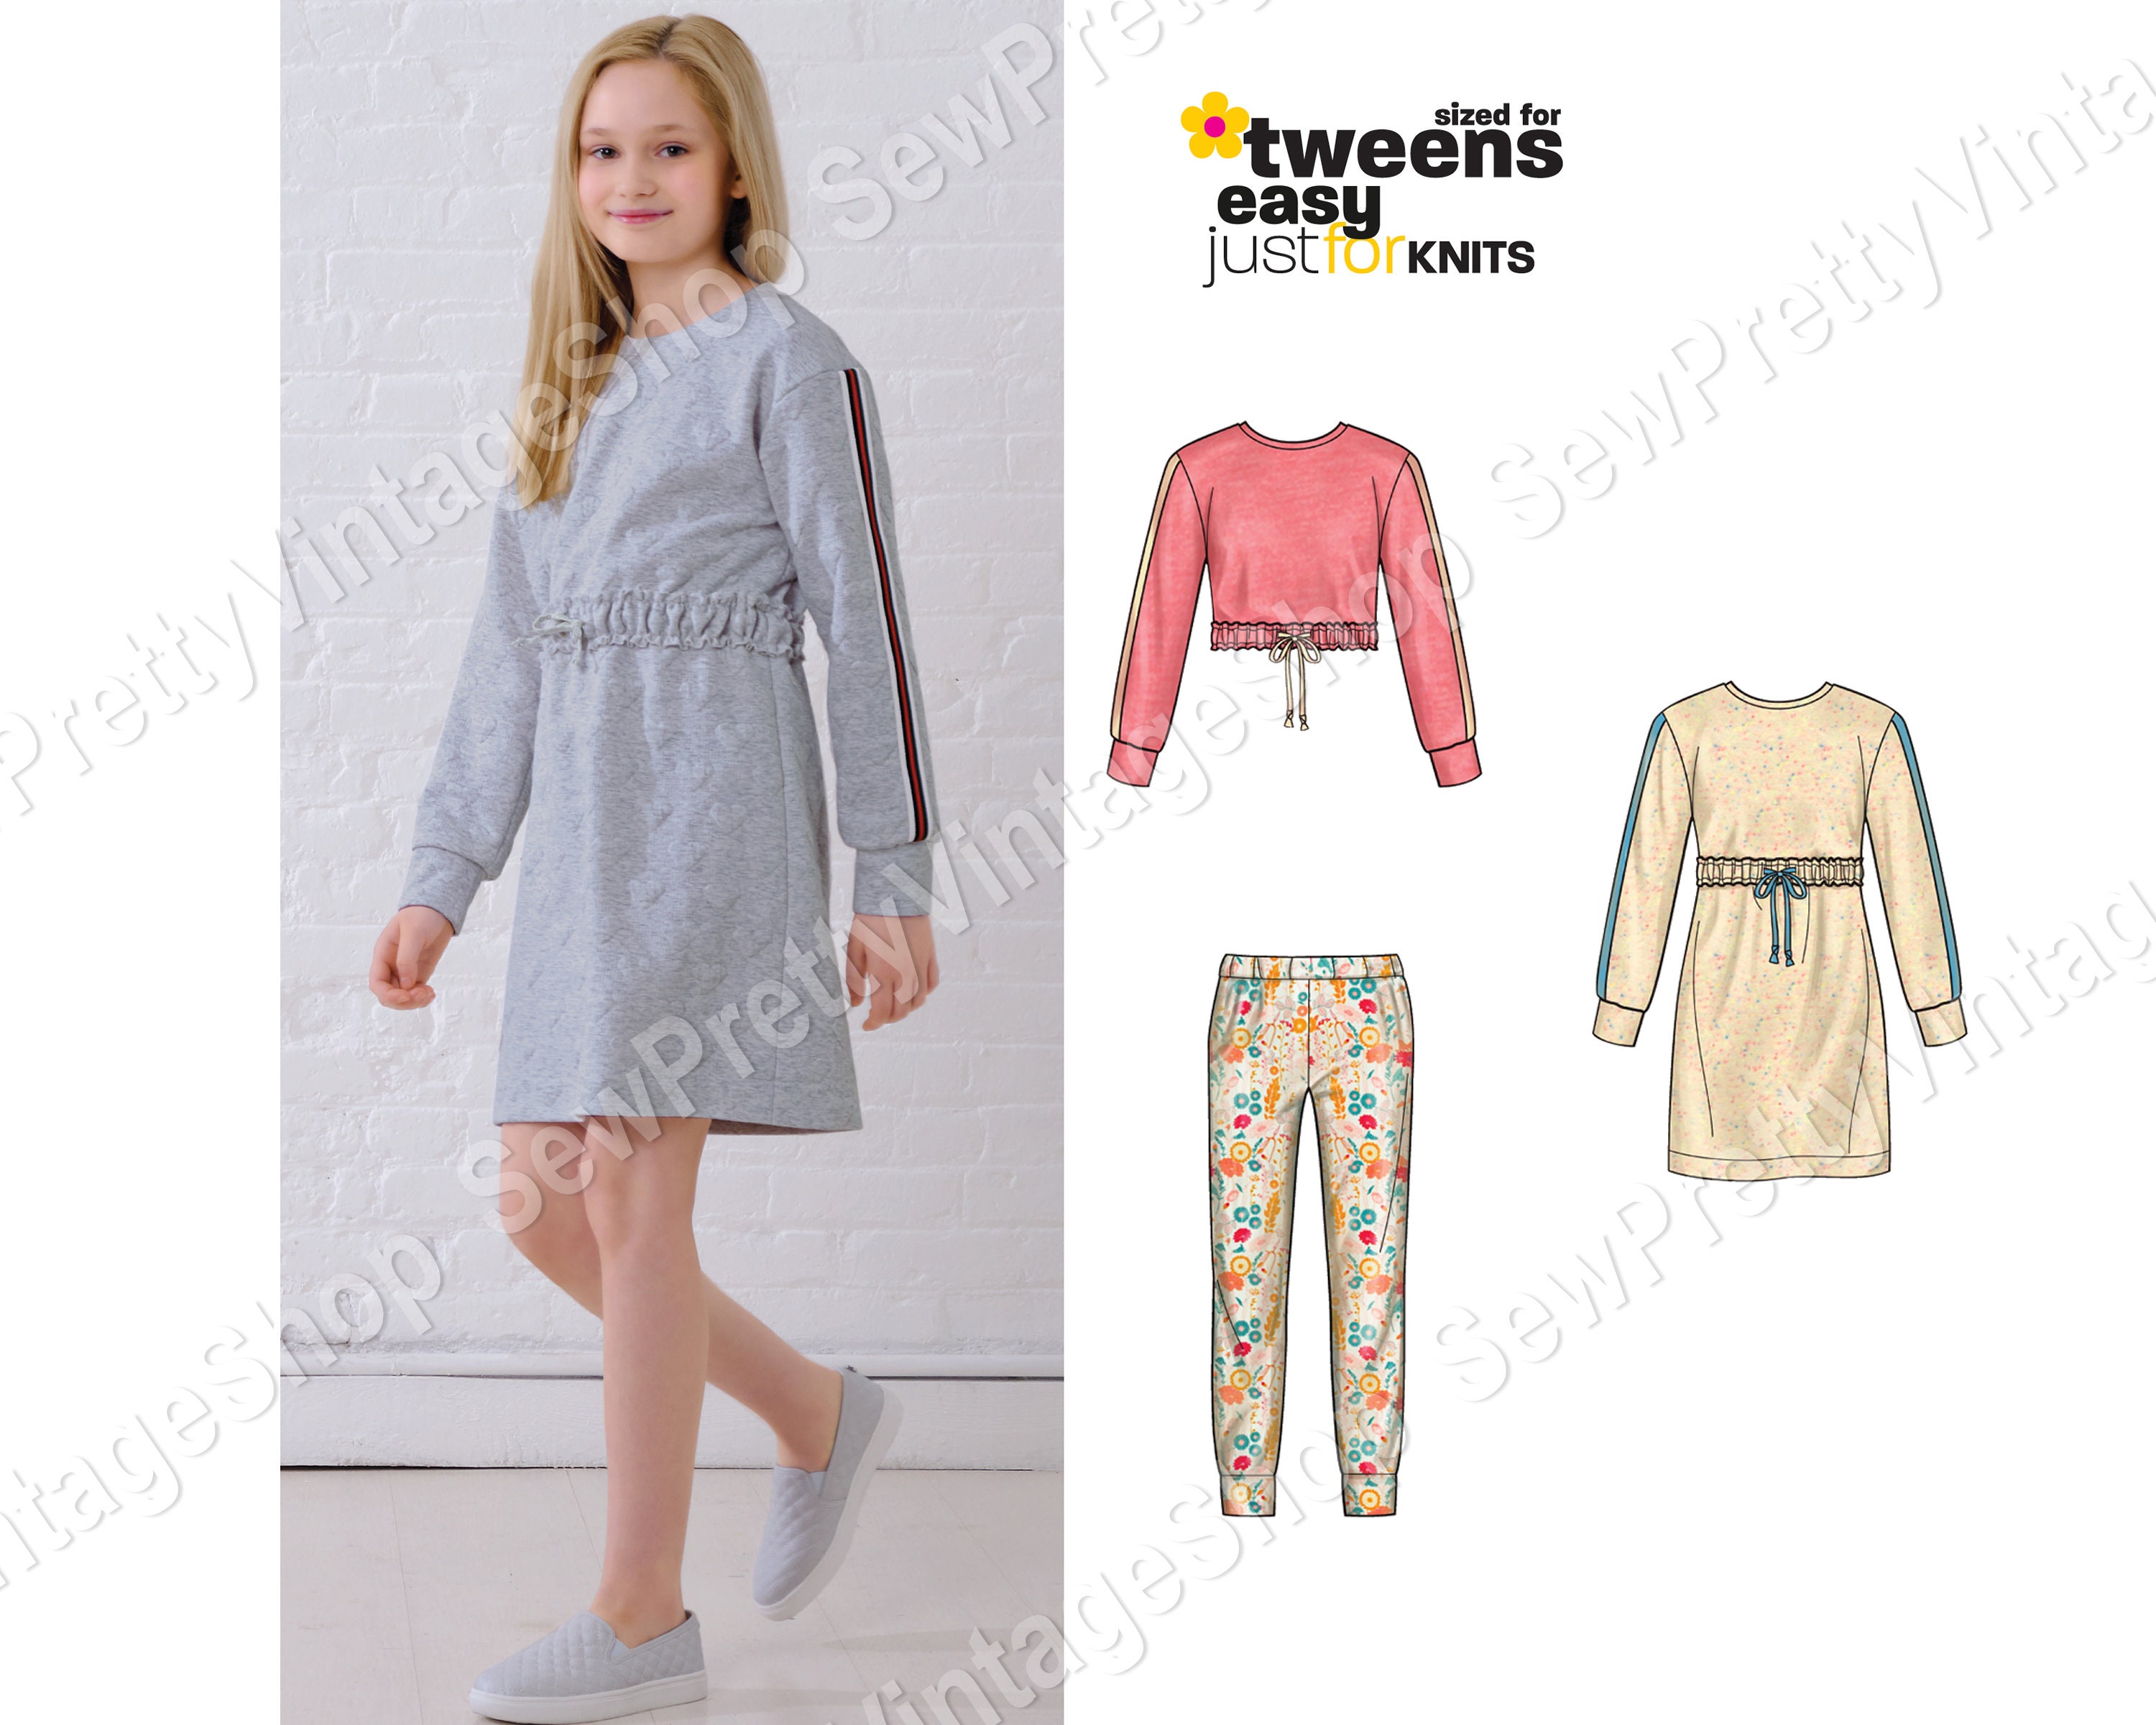 New Look 6649 Sporty Tween Girl Clothes: Knee Length Knit Dress, Pullover  Sweatshirt Top and Leggings Sewing Pattern Size 8 10 12 14 16 